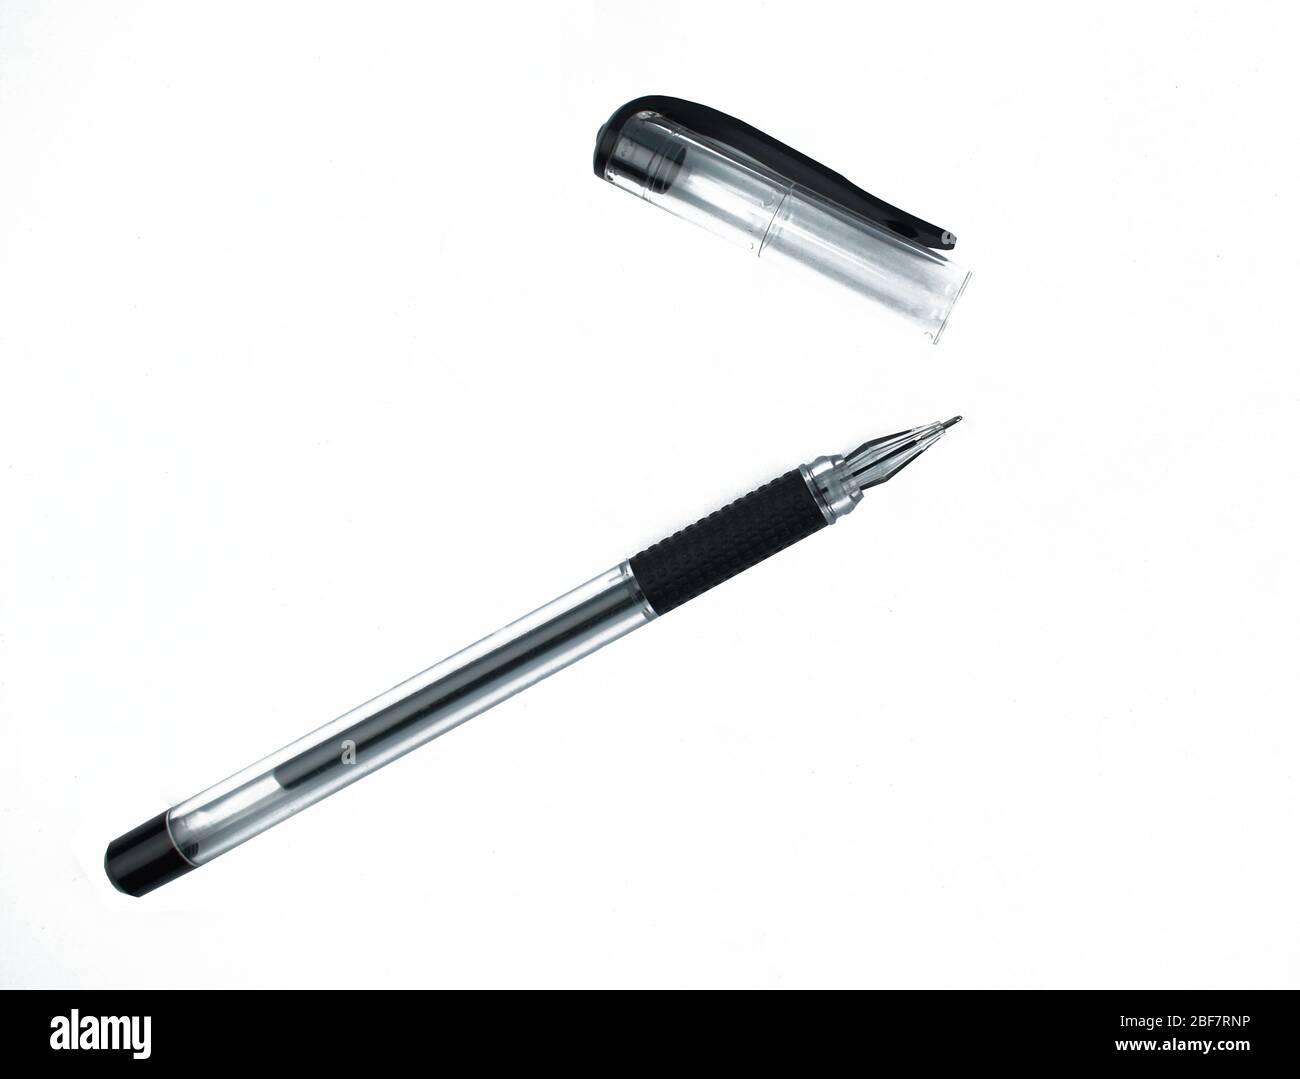 Black colored ball point pen and its cap scattered on top of a white isolated background Stock Photo